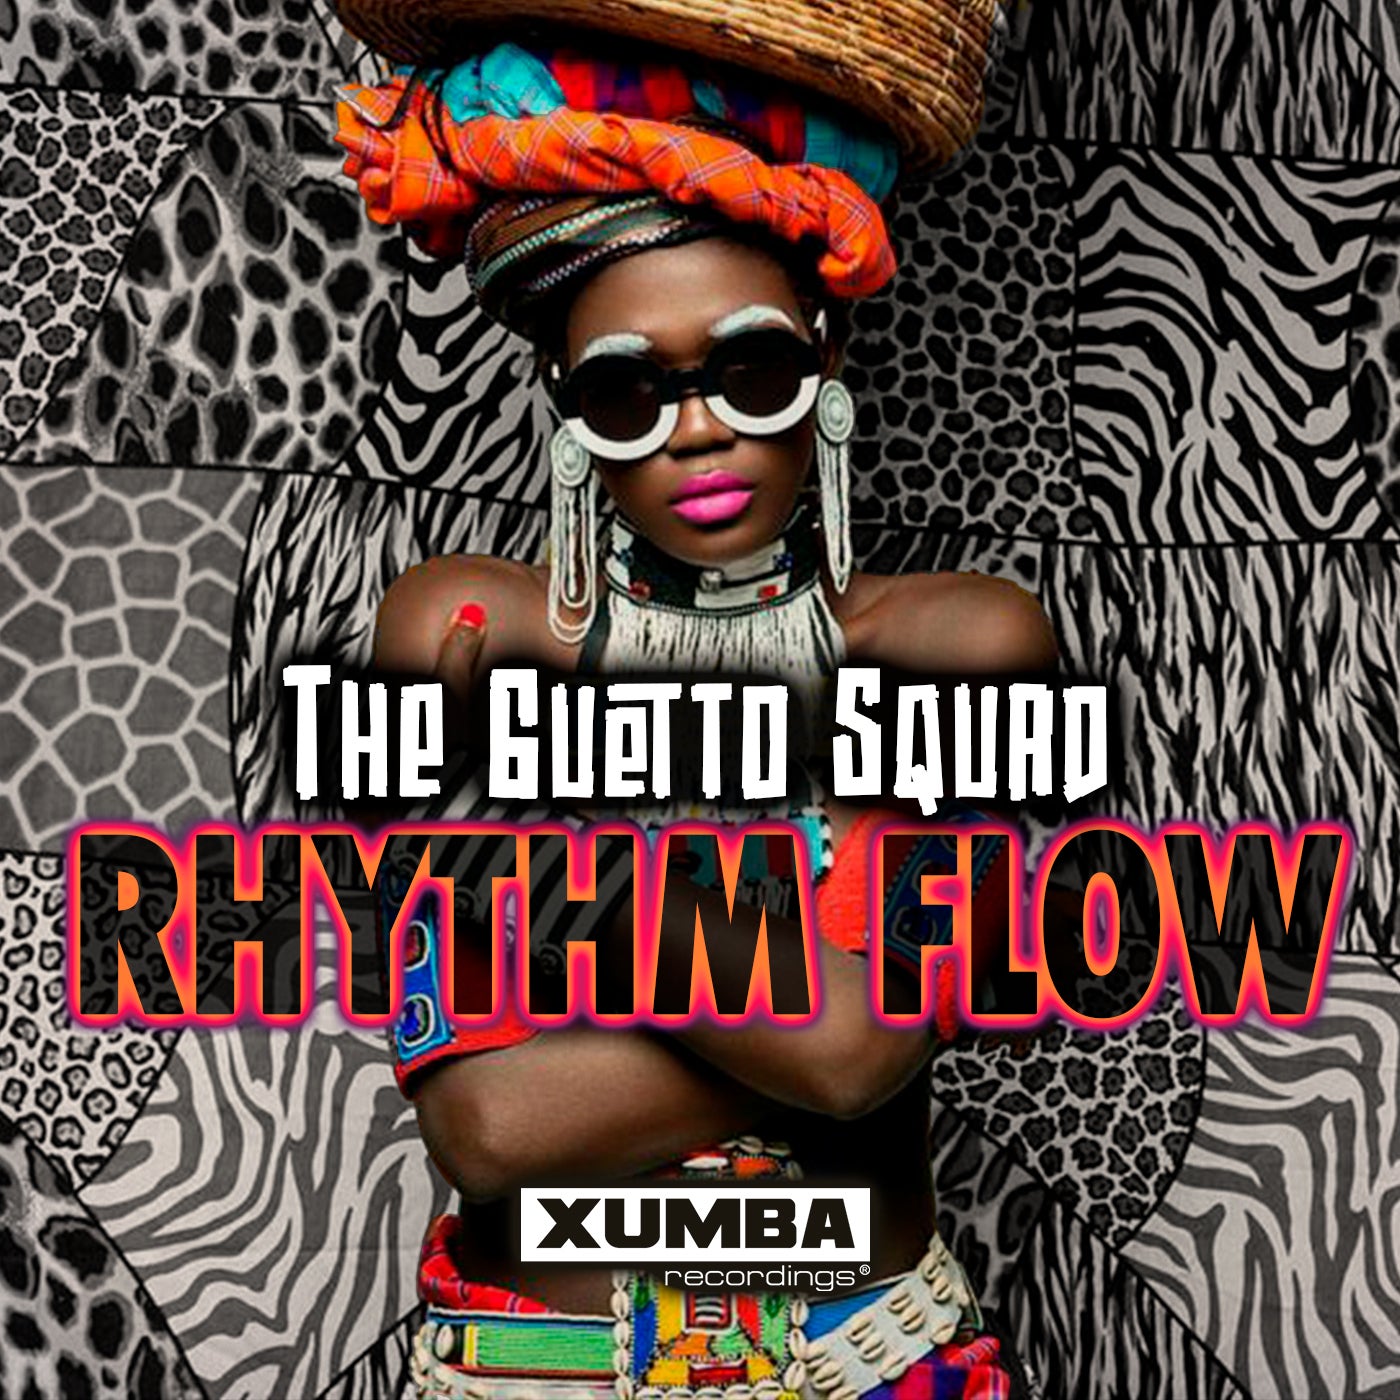 The Guetto Squad - Rhythm Flow on Xumba Recordings